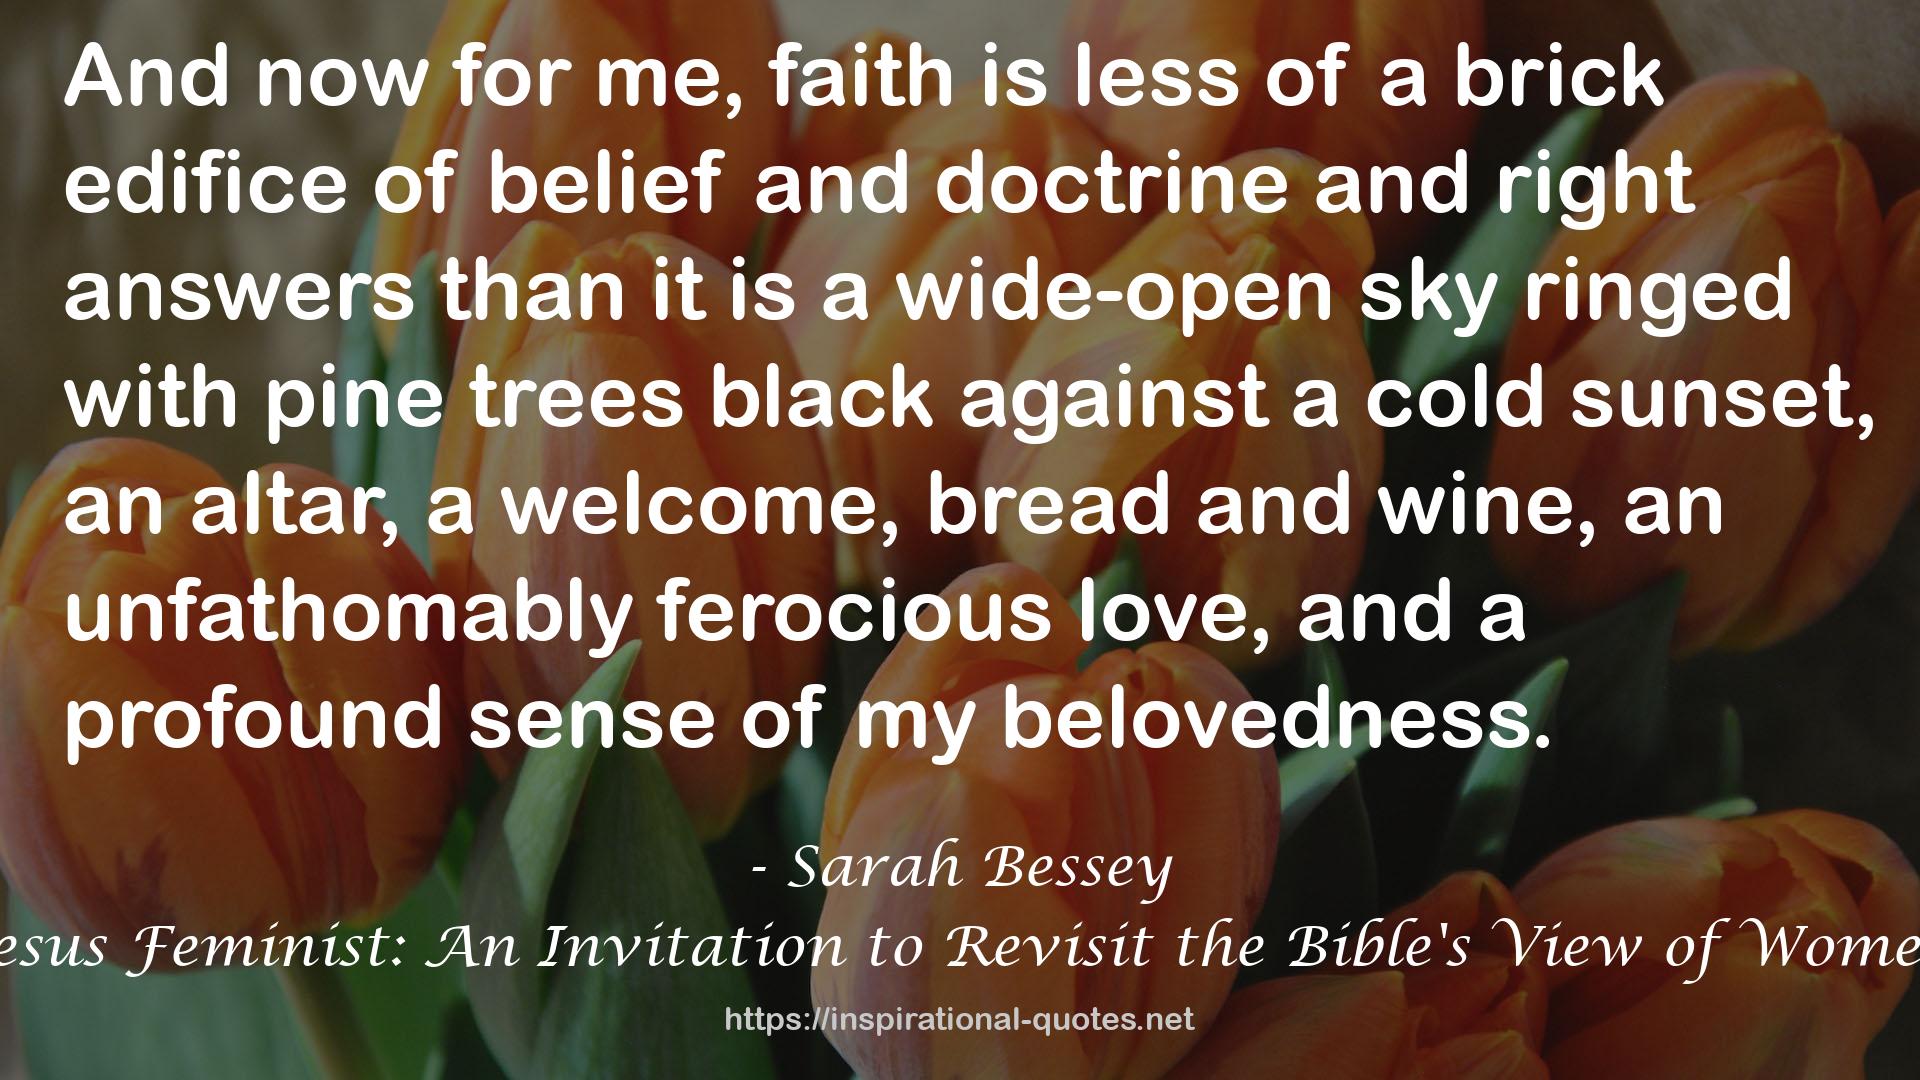 Jesus Feminist: An Invitation to Revisit the Bible's View of Women QUOTES